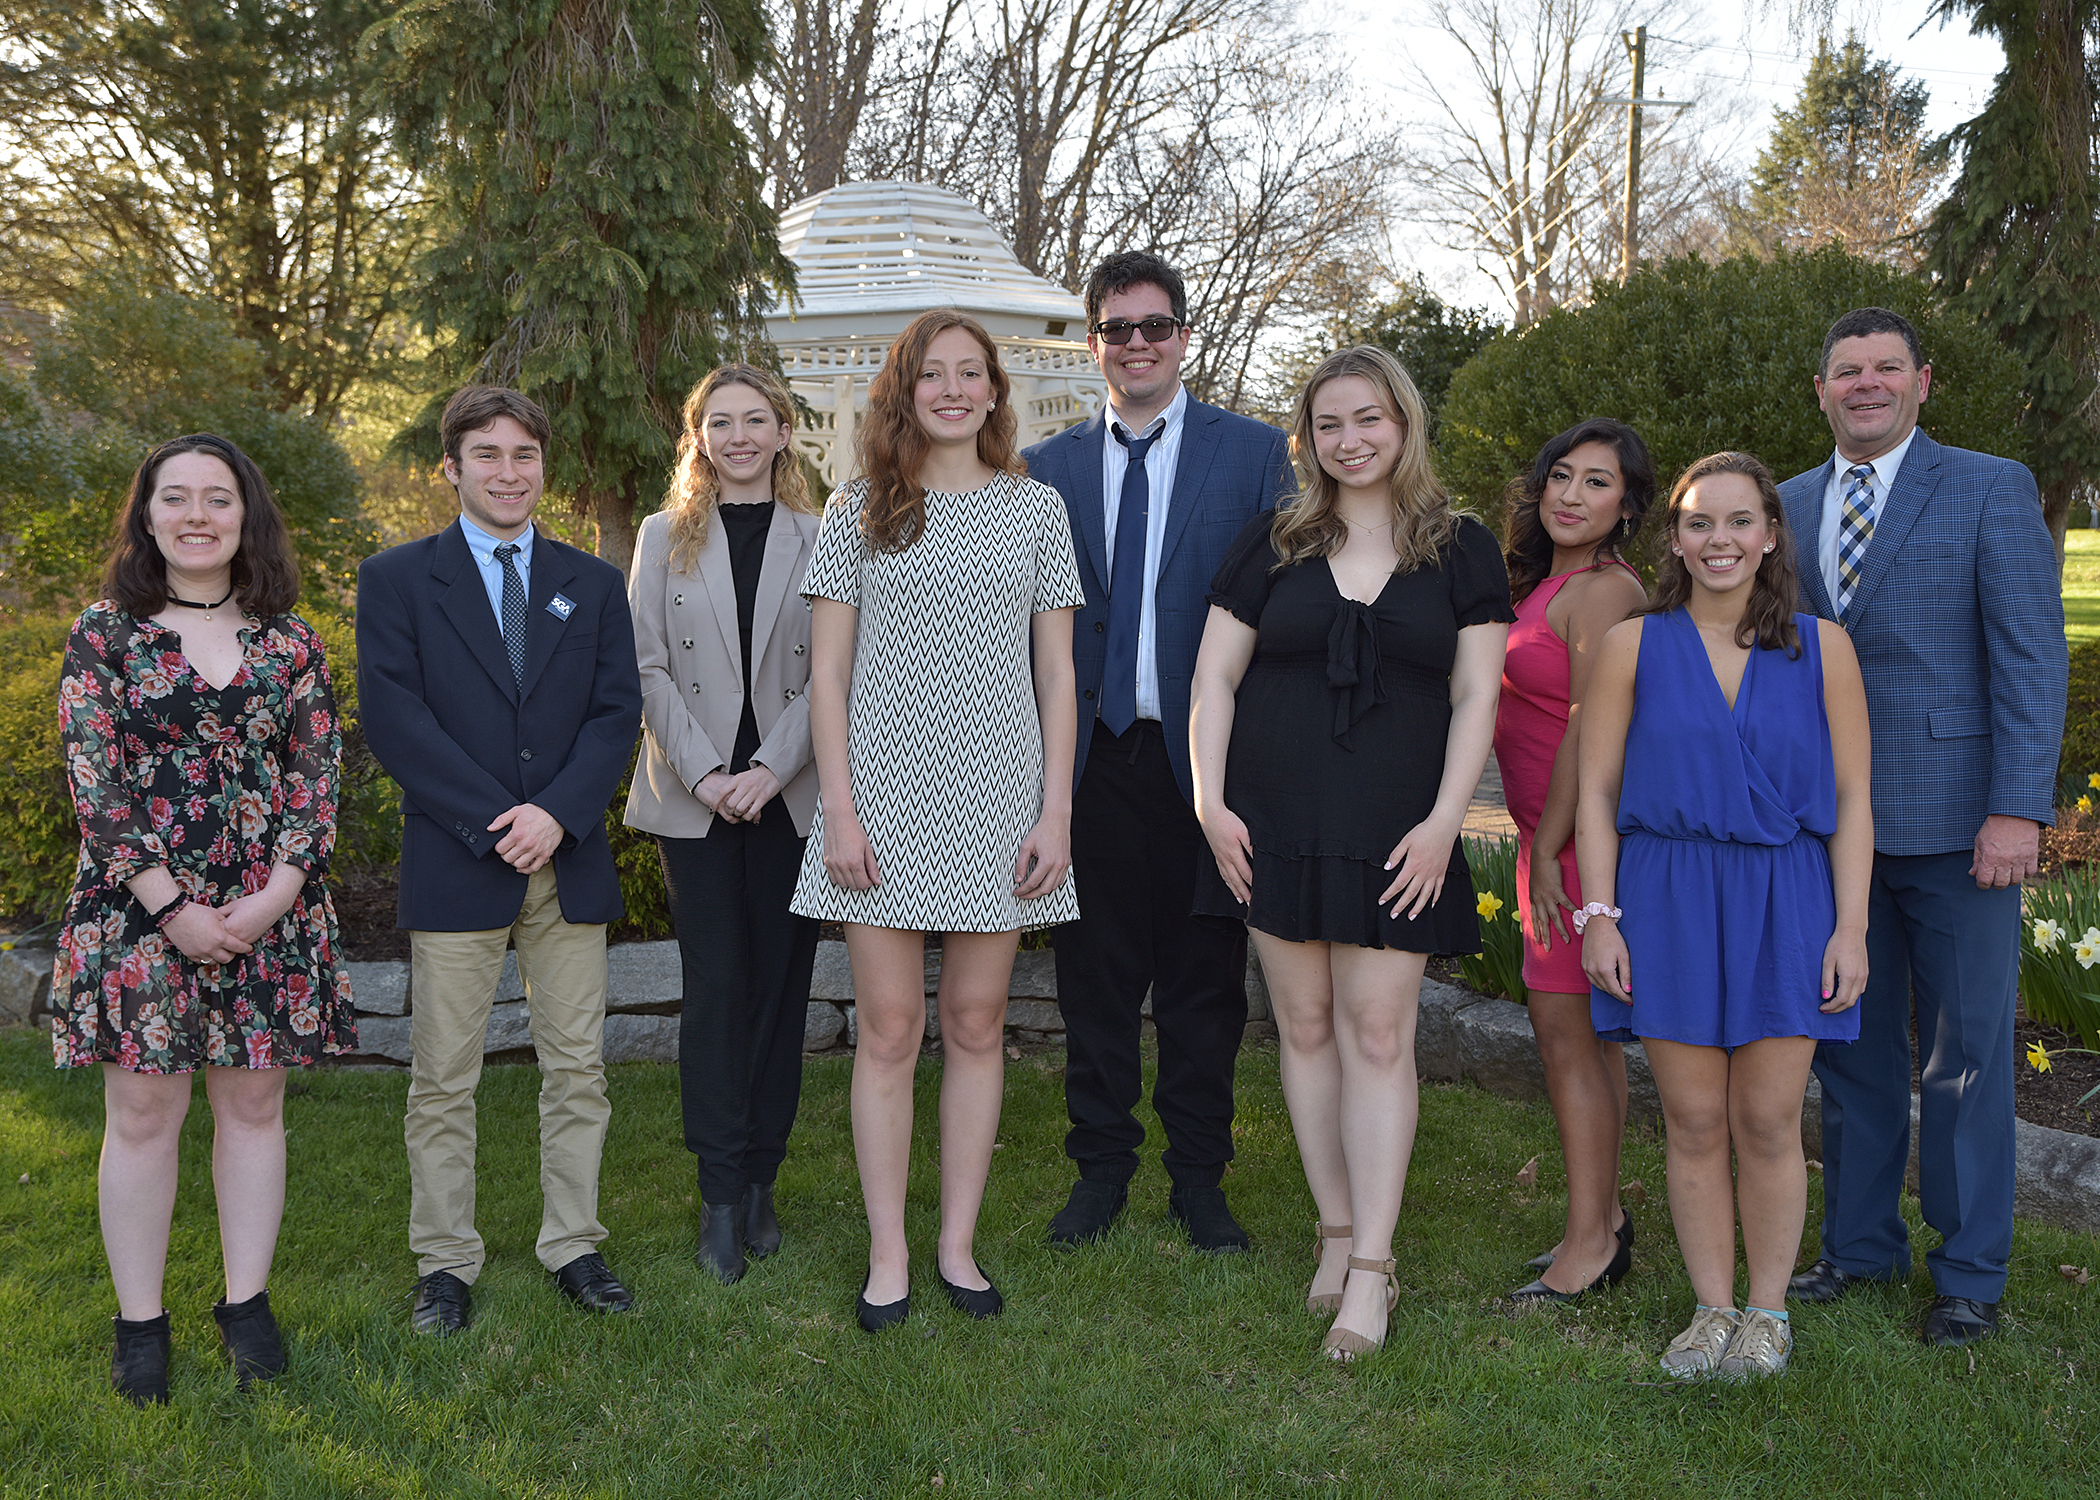 WCSU students who received Alumni Scholarships and attended the awards ceremony and dinner (from left to right, pictured with Alumni Association President Raymond Lubus, far right): Allison Cerasale, Prospect; Michael Azzi, New Fairfield; Fallon Campbell, Carmel, NY; Sophie Leeds, Trumbull; Ryan Perreault, Danbury; Skylar Bartush, Watertown; Abigail Curillo, New Milford; and Mary Lubus, New Fairfield.